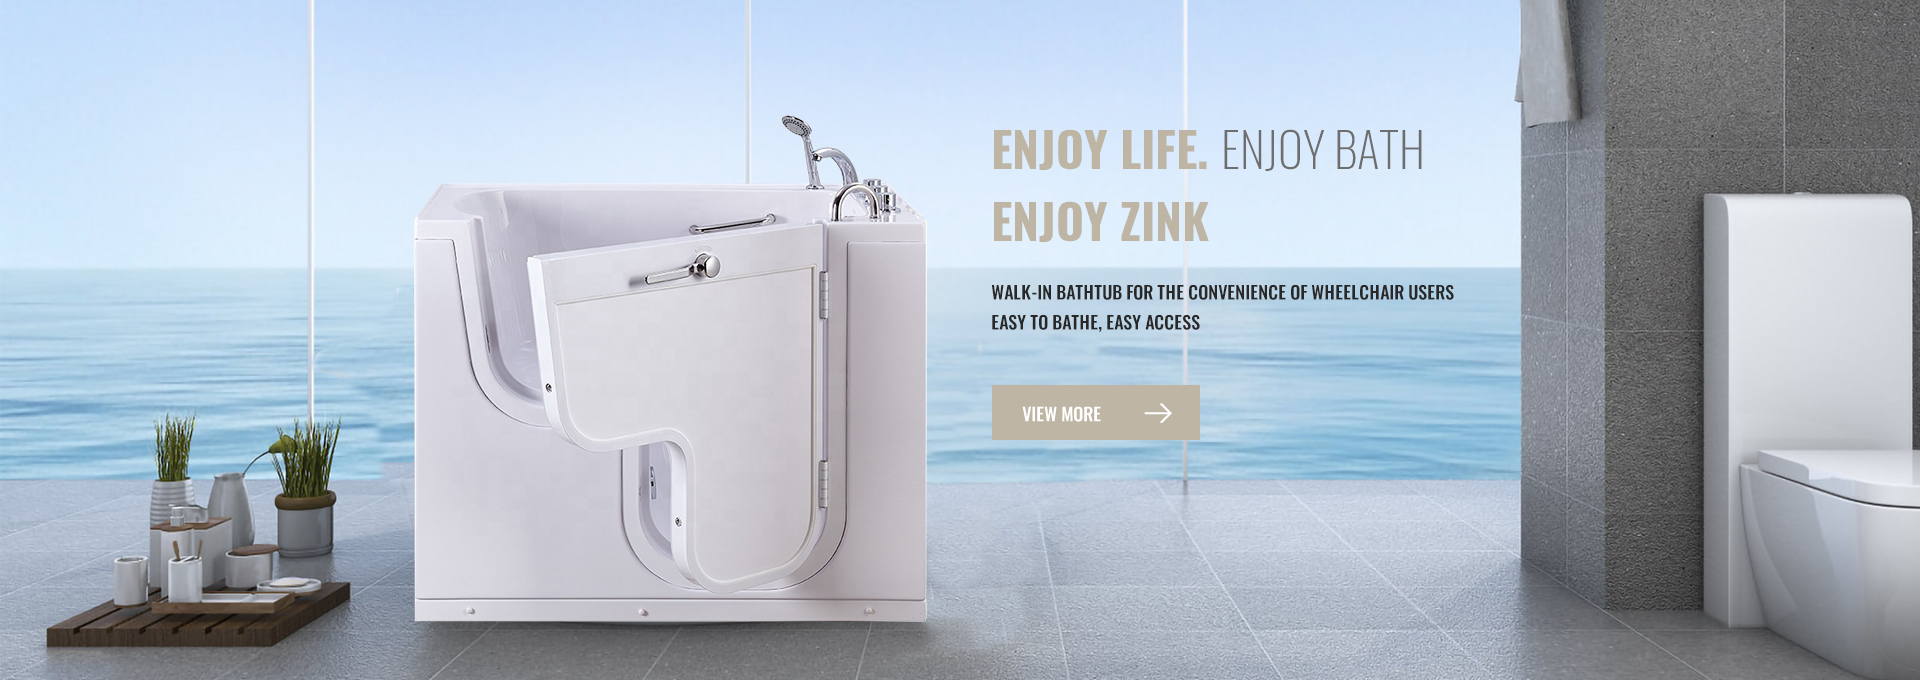 Reliable and Innovative: Foshan Zink Sanitary Ware Co., Ltd. – Your Trusted Partner for Top-Quality Walk-In Bathtubs and More